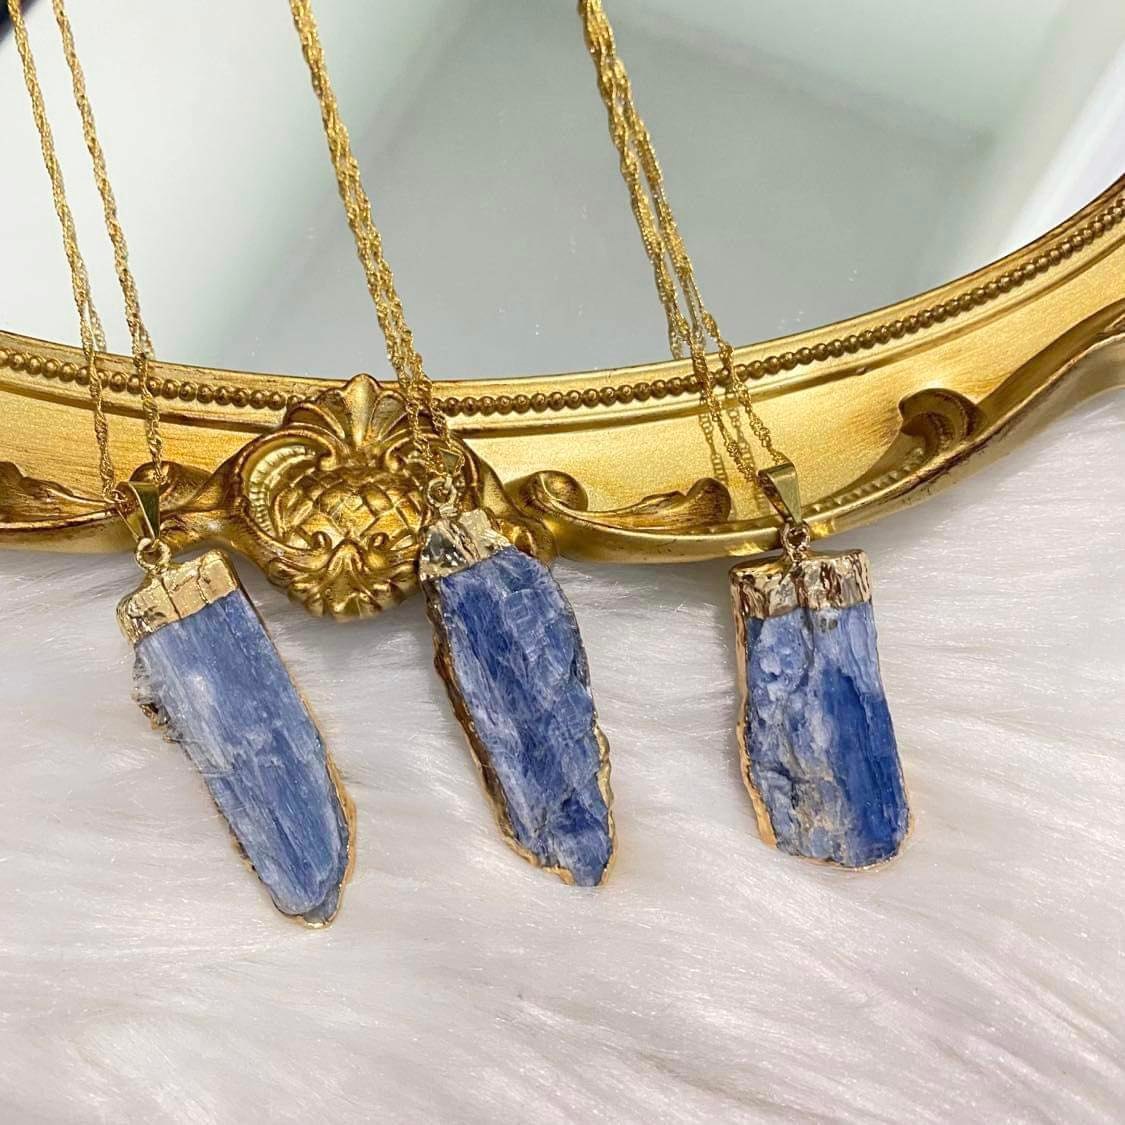 Natural Raw Kyanite Necklace with Gold Dipped Chain